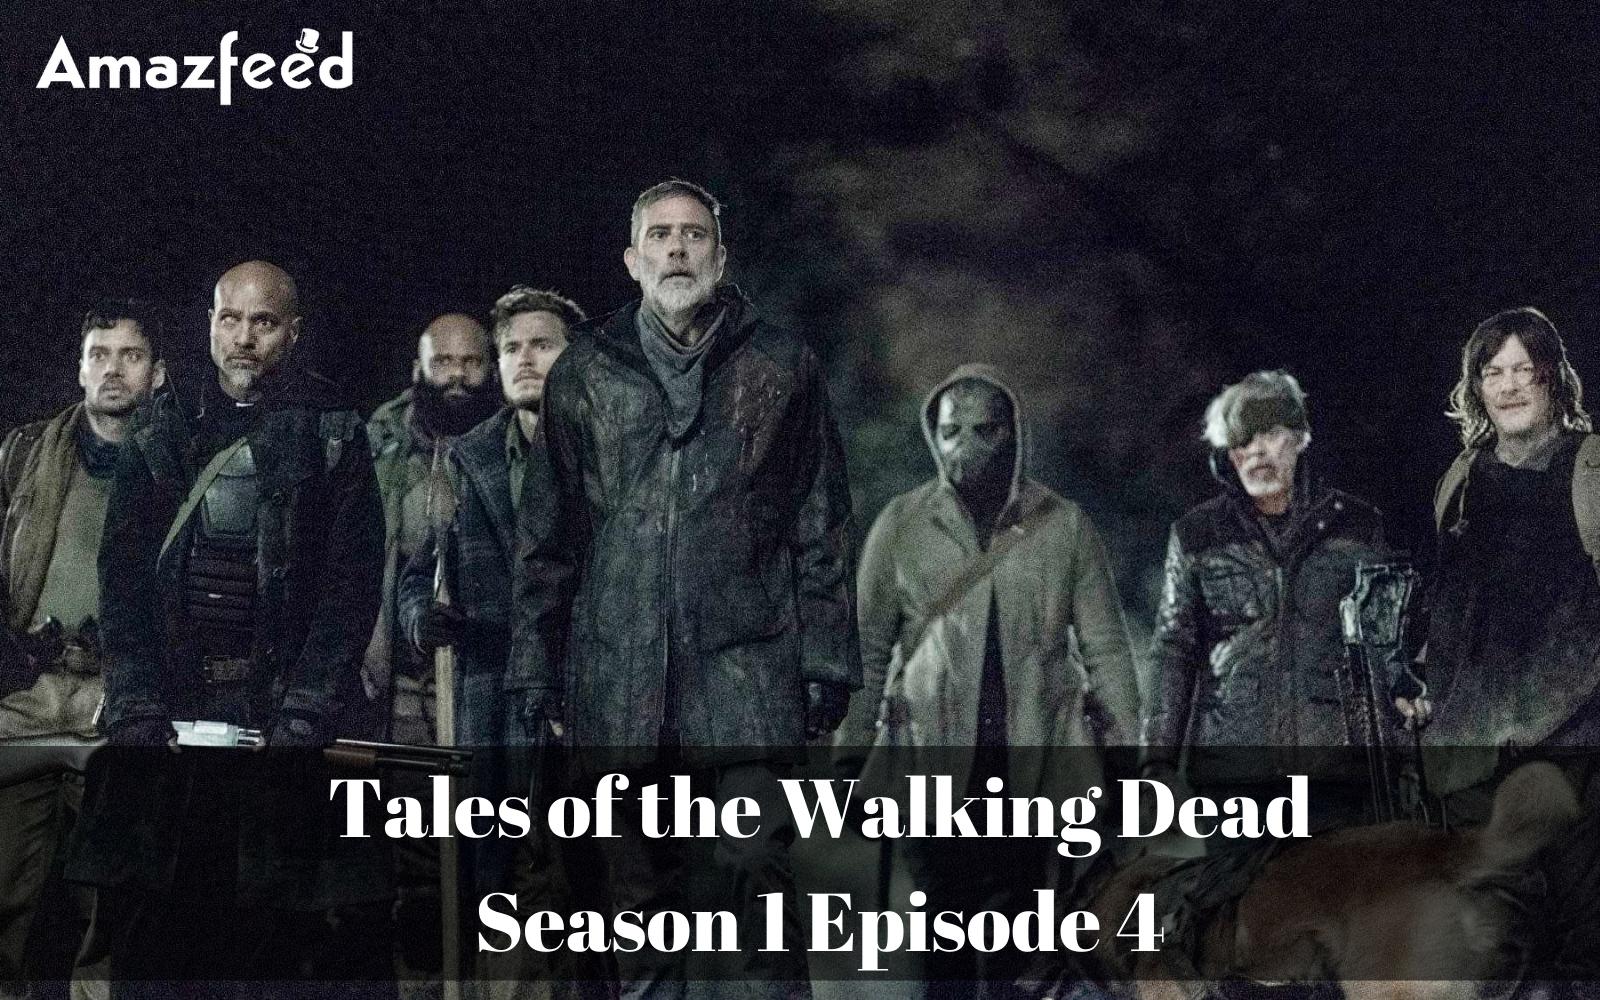 Tales of the Walking Dead Episode 4 "Amy/Dr. Everett" Countdown, Release Date, Spoiler, Recap, & Where to Watch